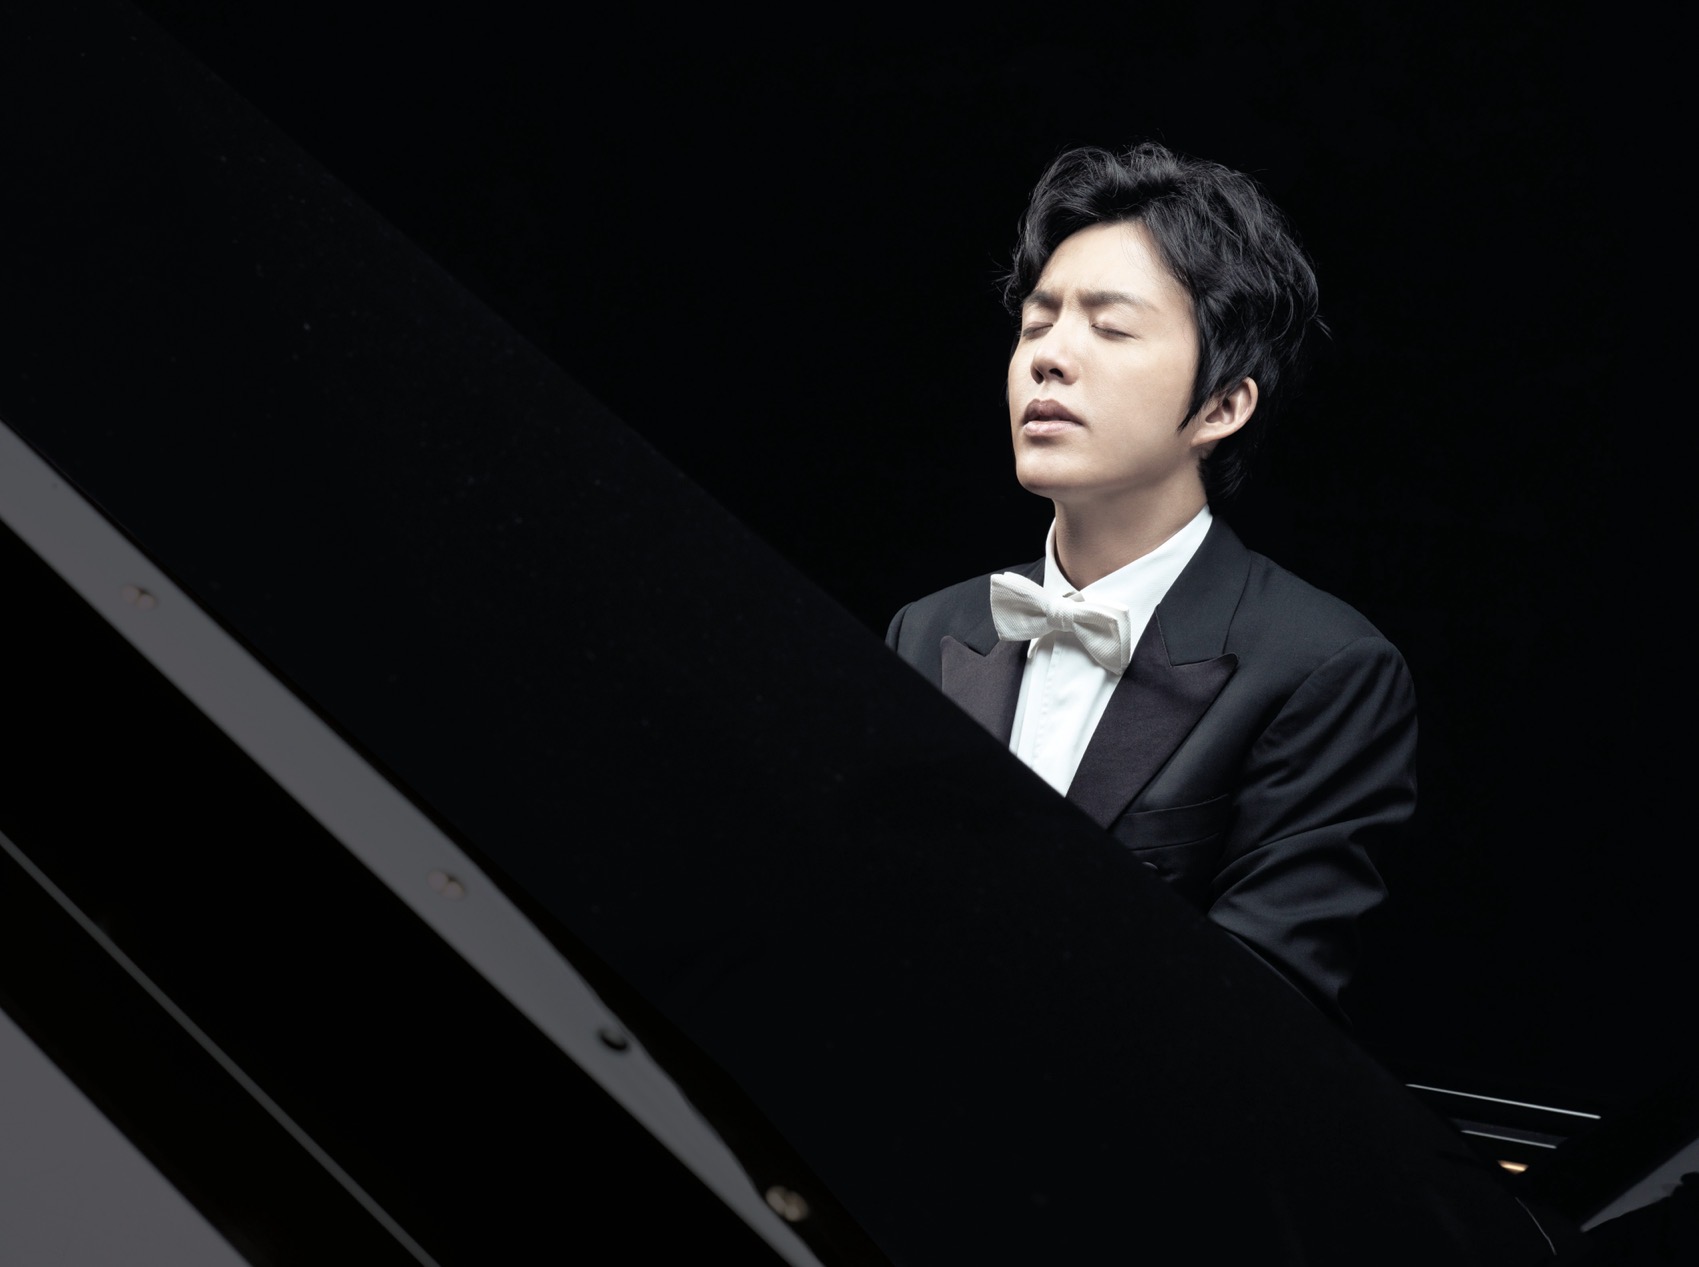 A young pianist in a black dinner jacket plays the piano with his eyes closed.